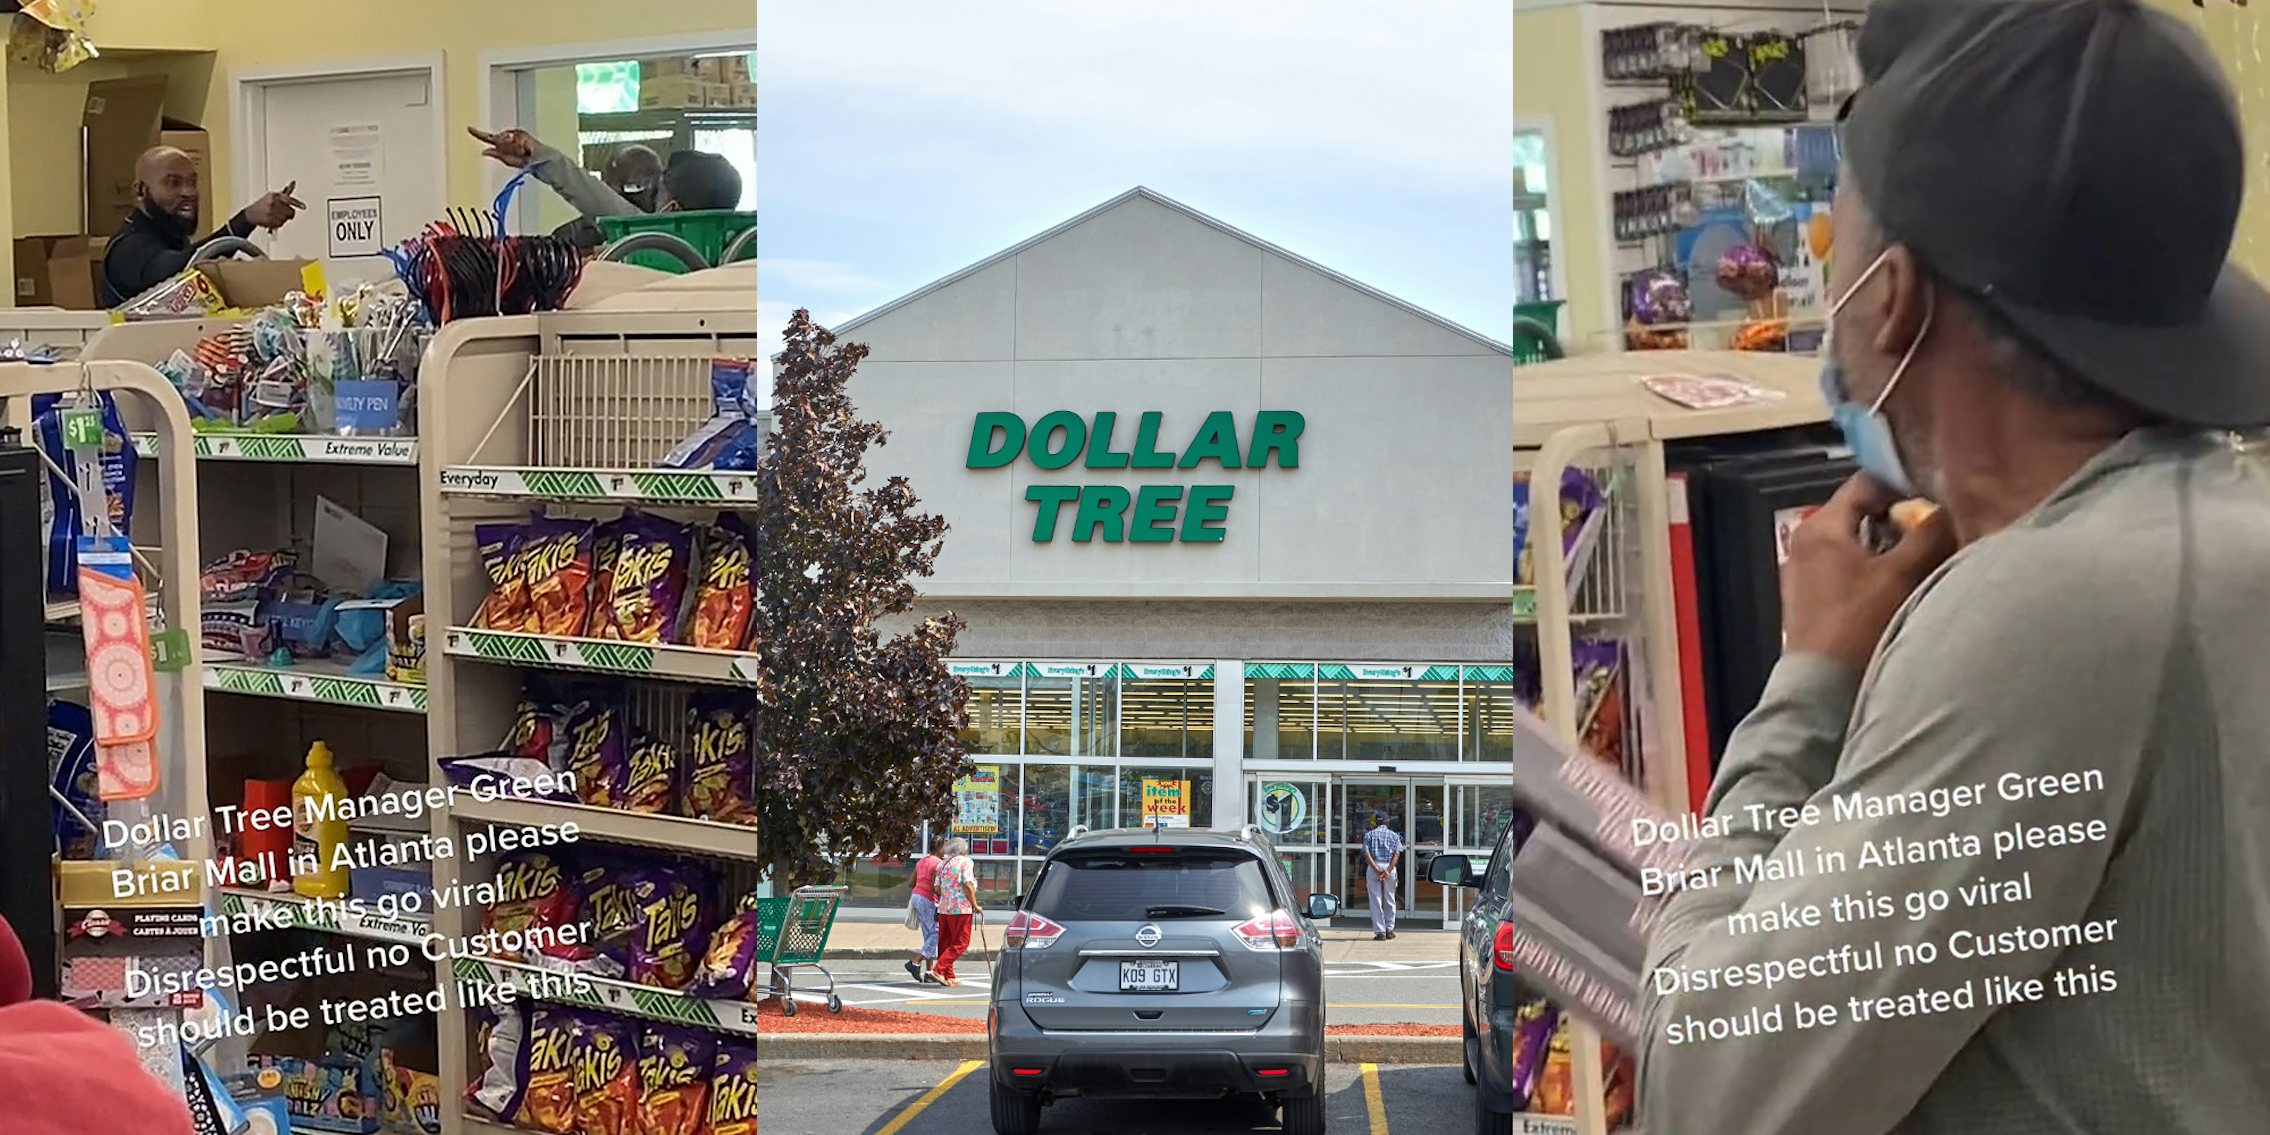 Dollar Tree manager speaking to customer caption 'Dollar Tree Manager Green Briar Mall in Atlanta please make this go viral Disrespectful no Customer should be treated like this' (l) Dollar Tree building with sign (c) Customer at Dollar Tree speaking caption 'Dollar Tree Manager Green Briar Mall in Atlanta please make this go viral Disrespectful no Customer should be treated like this' (r)